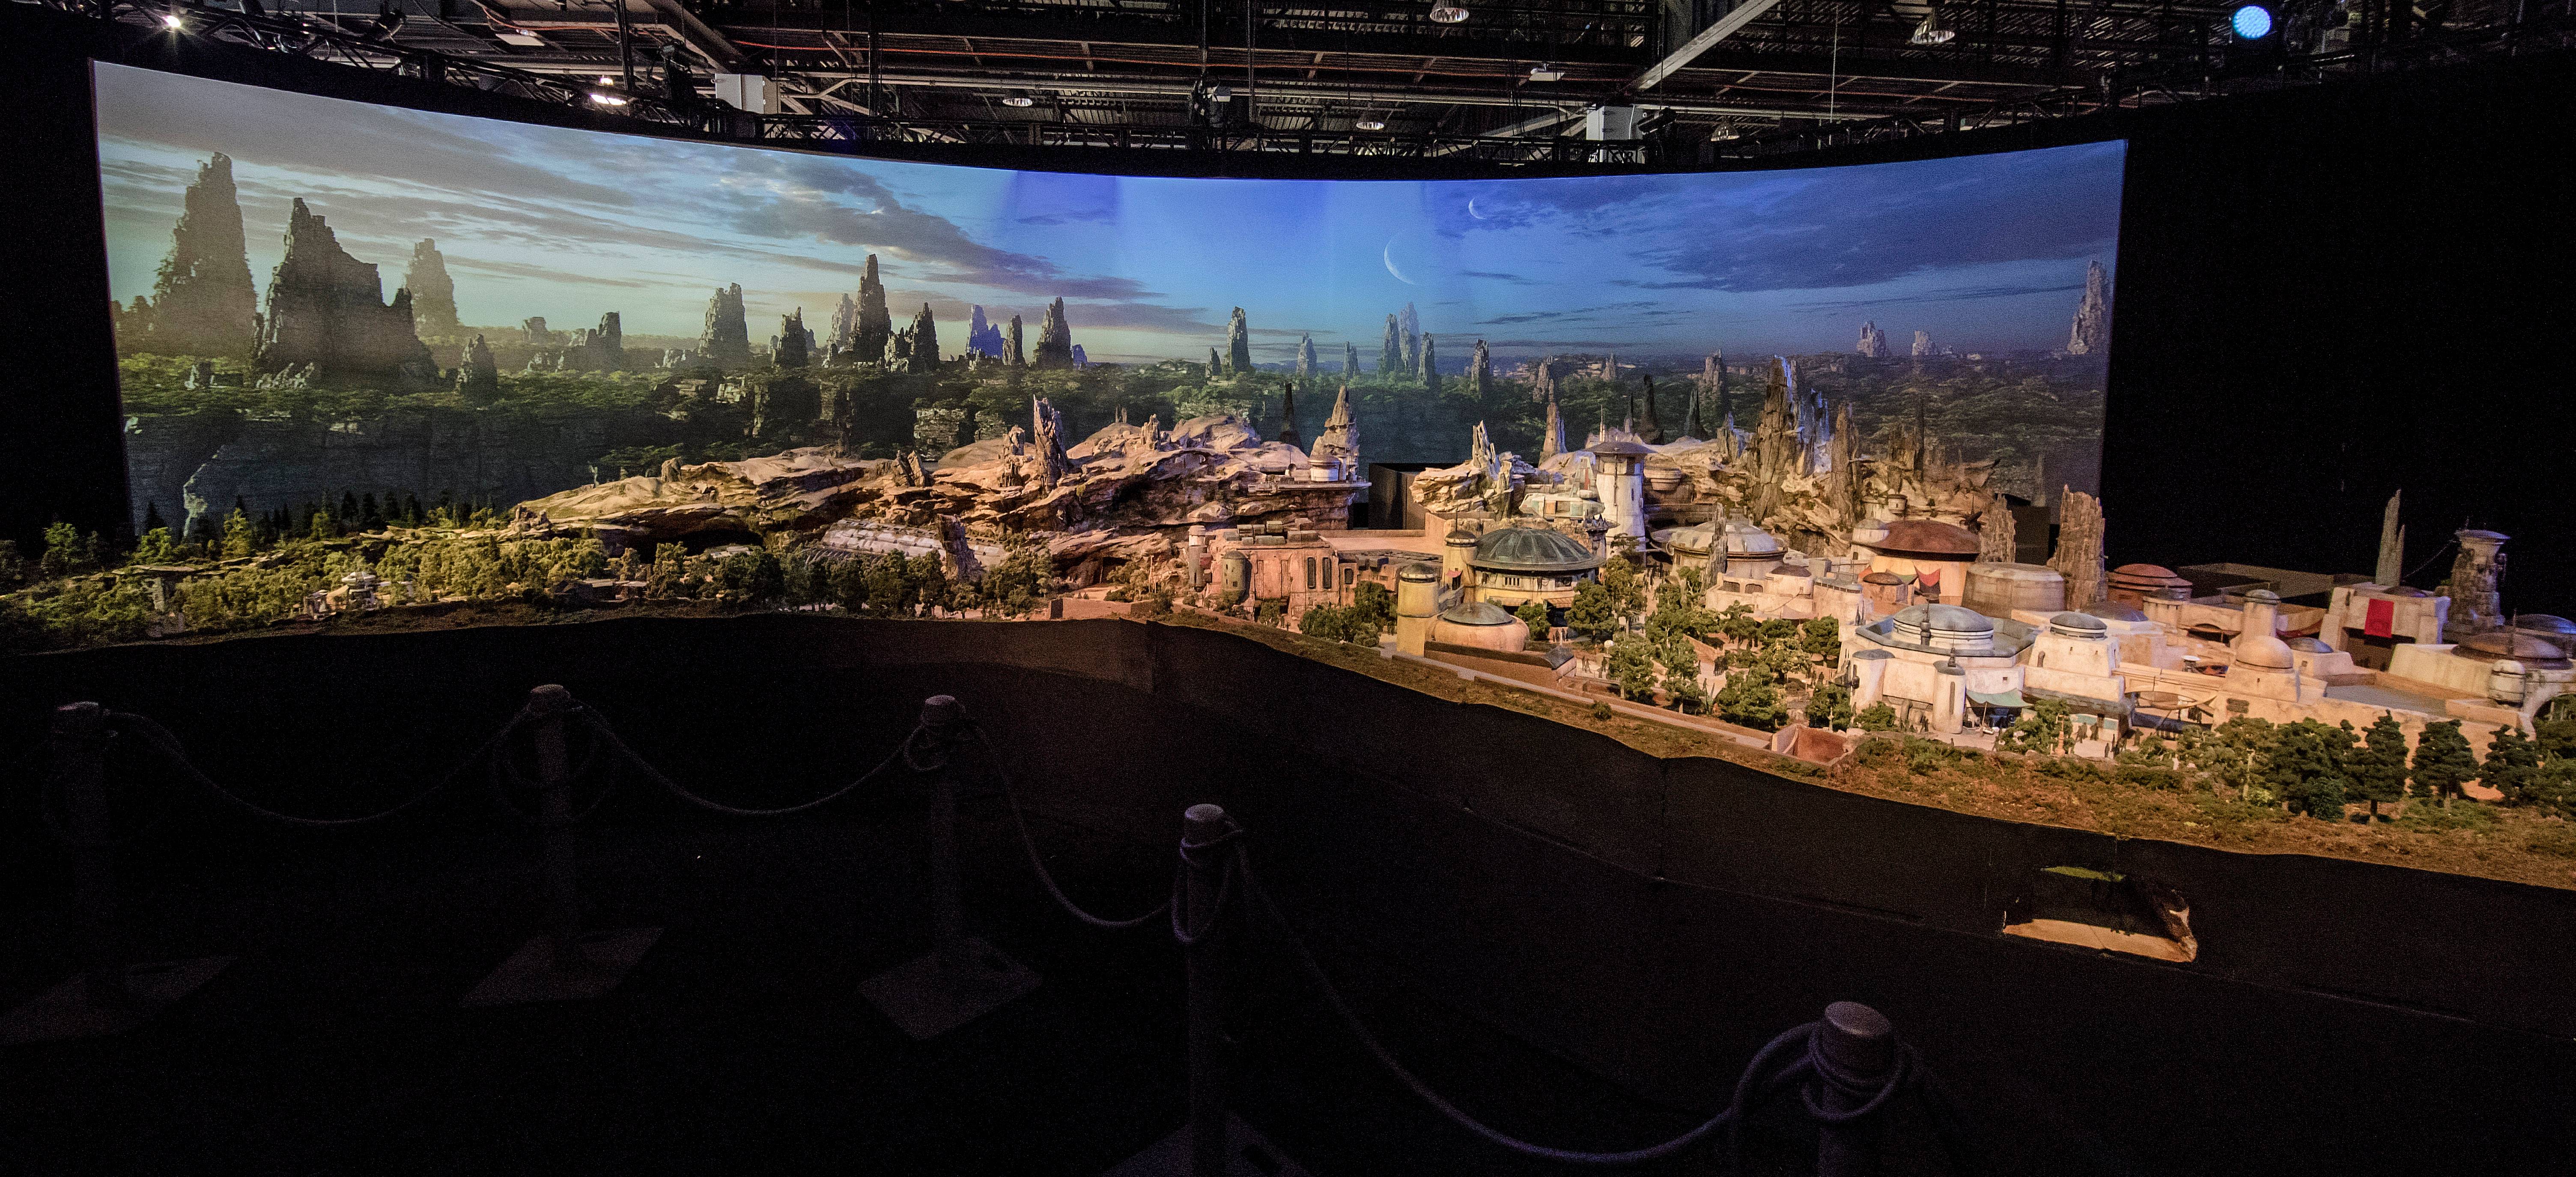 The Star Wars Land model on display at D23 Expo